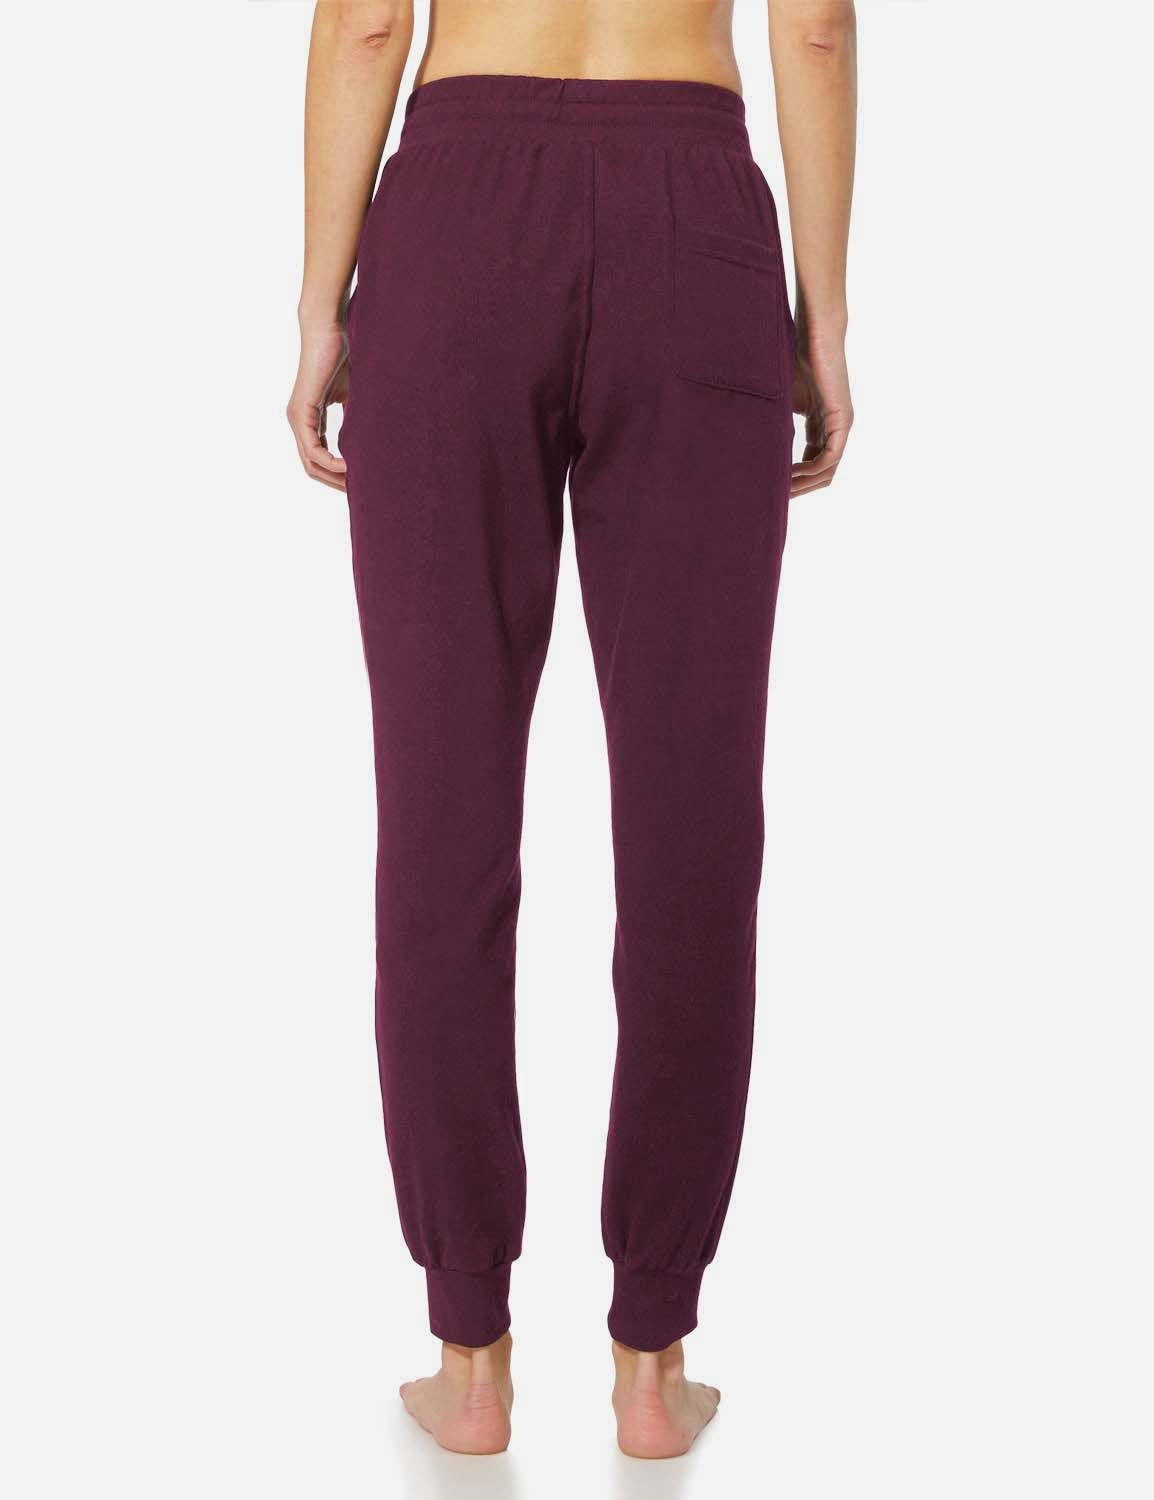 Baleaf Women's Cotton Comfy Pocketed & Tapered Weekend Joggers abh103 Burgundy Back